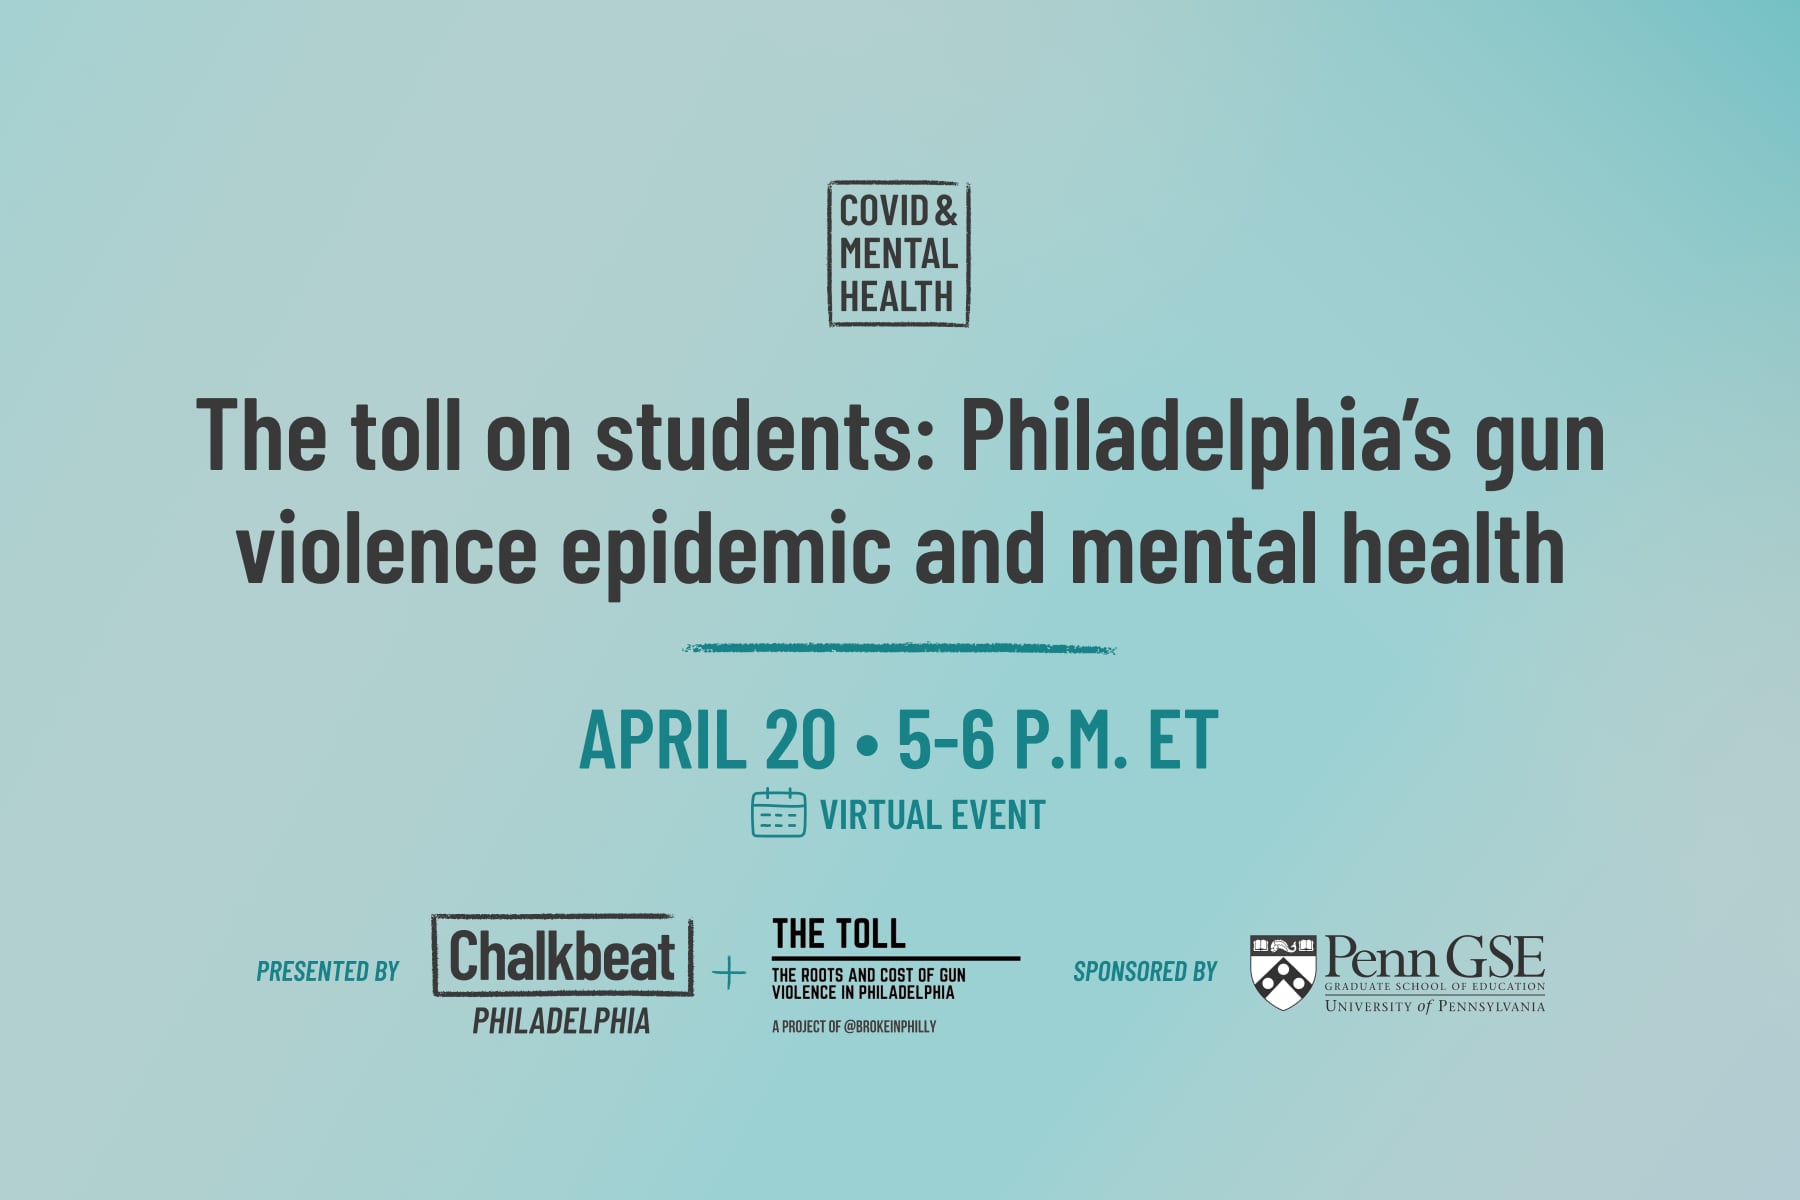 An event promotional image with the title “The toll on students:&nbsp;Philadelphia’s gun violence epidemic and mental health” against a light blue background. 